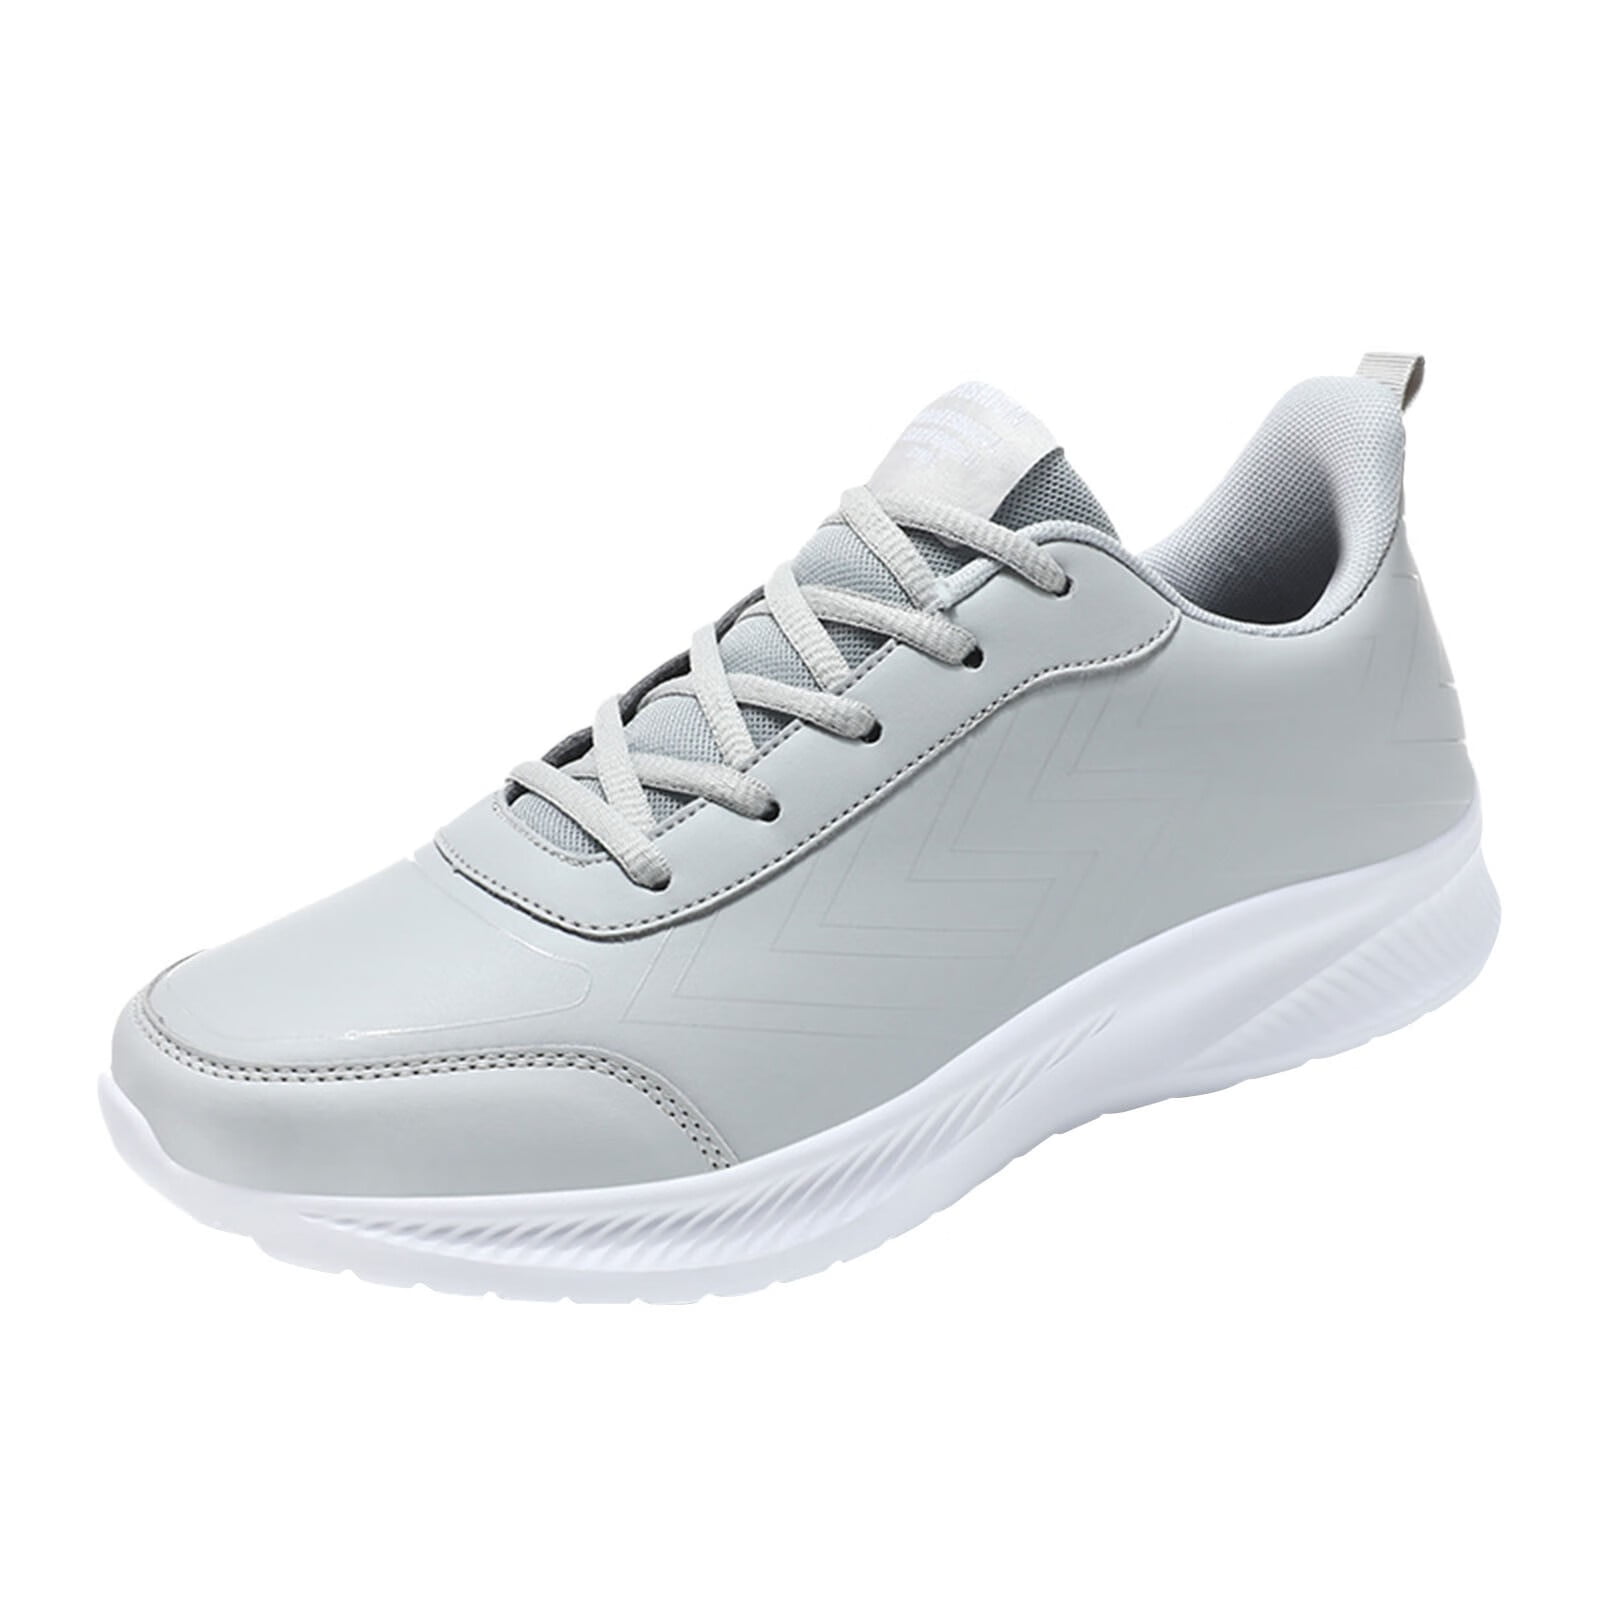 Sneakers (स्नीकर्स) - Upto 50% to 80% OFF on Sneakers Online at Best Prices  In India | Flipkart.com